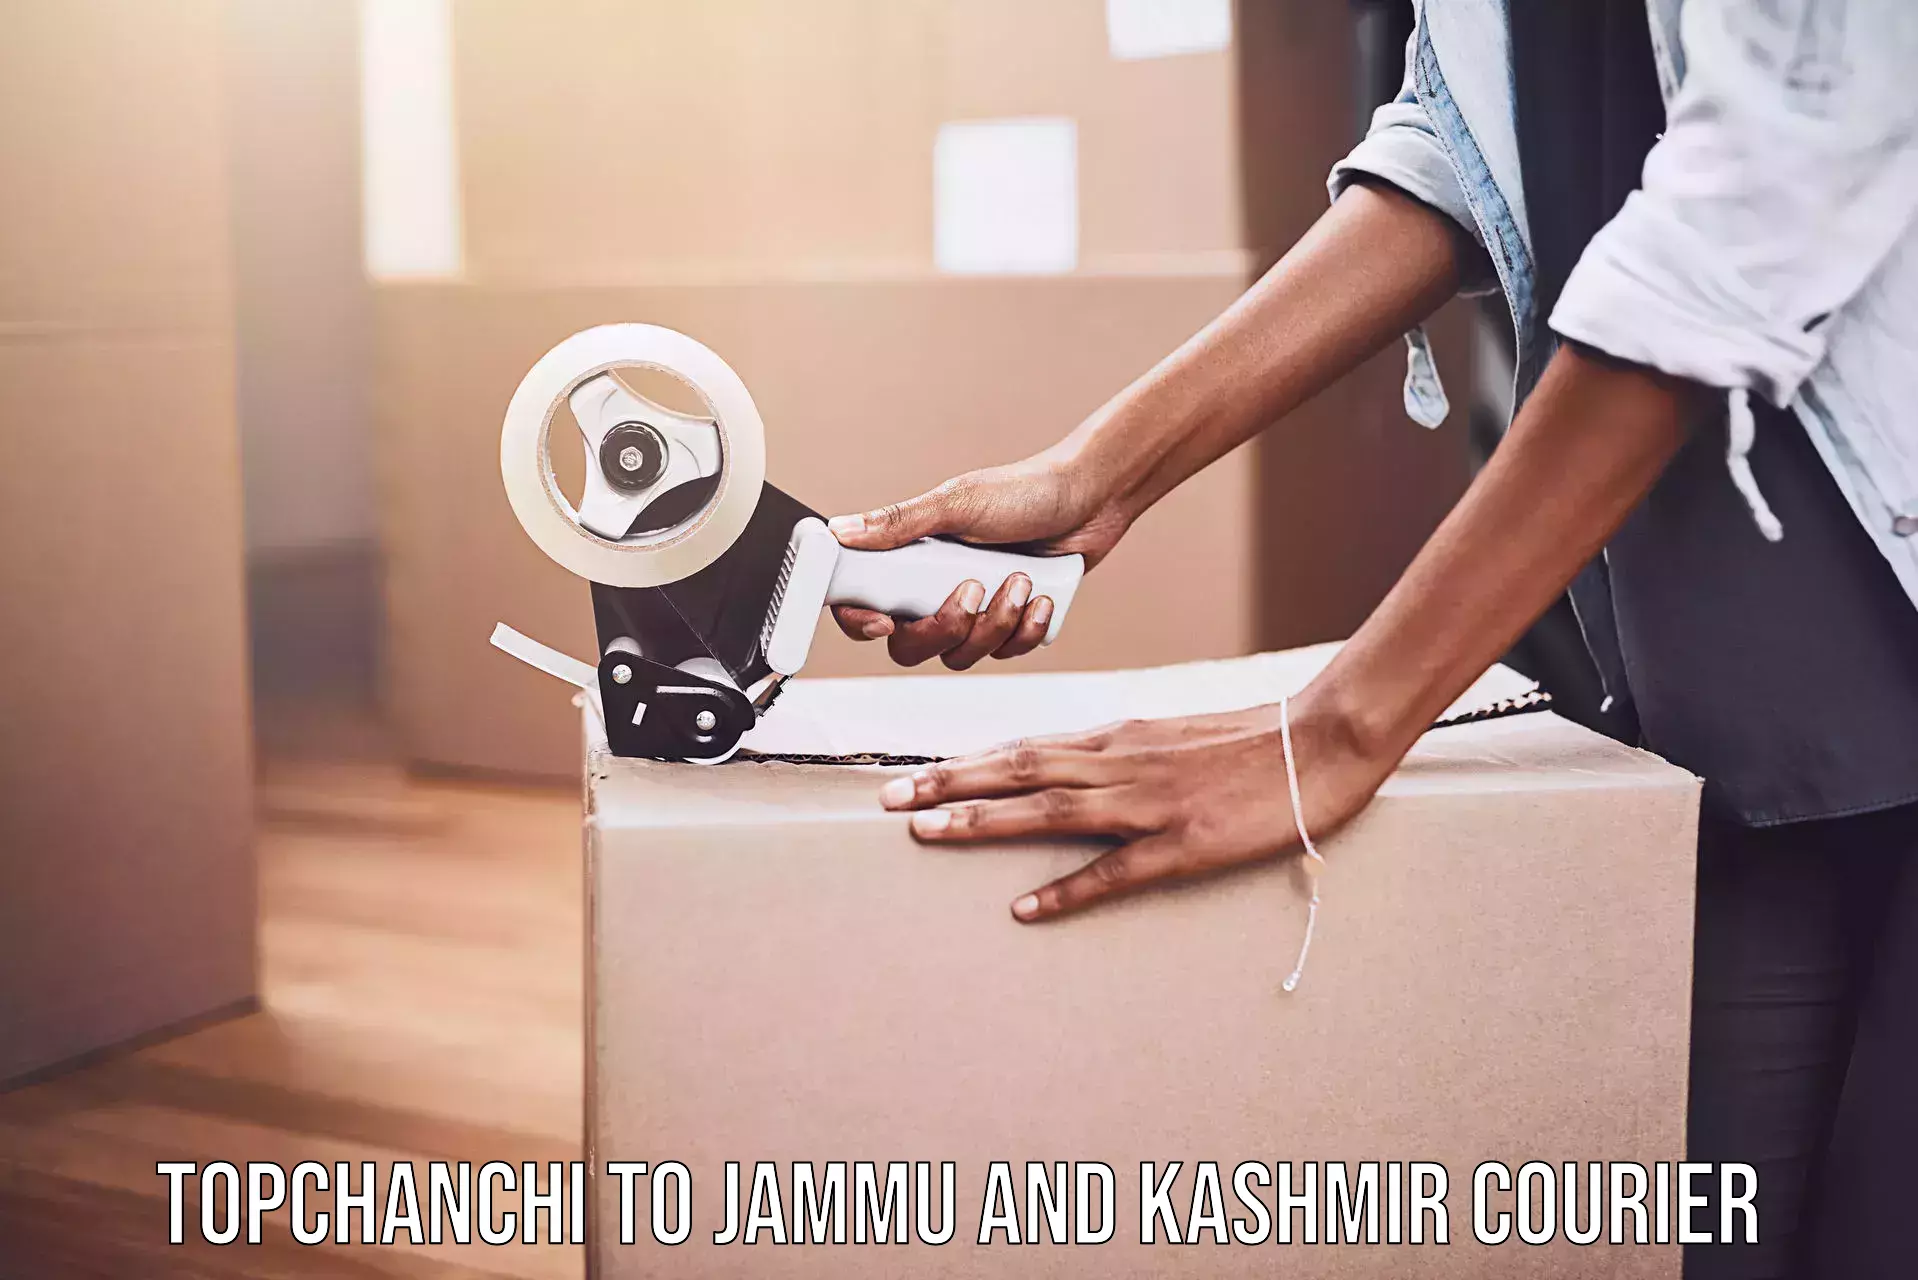 Courier service innovation in Topchanchi to Jammu and Kashmir